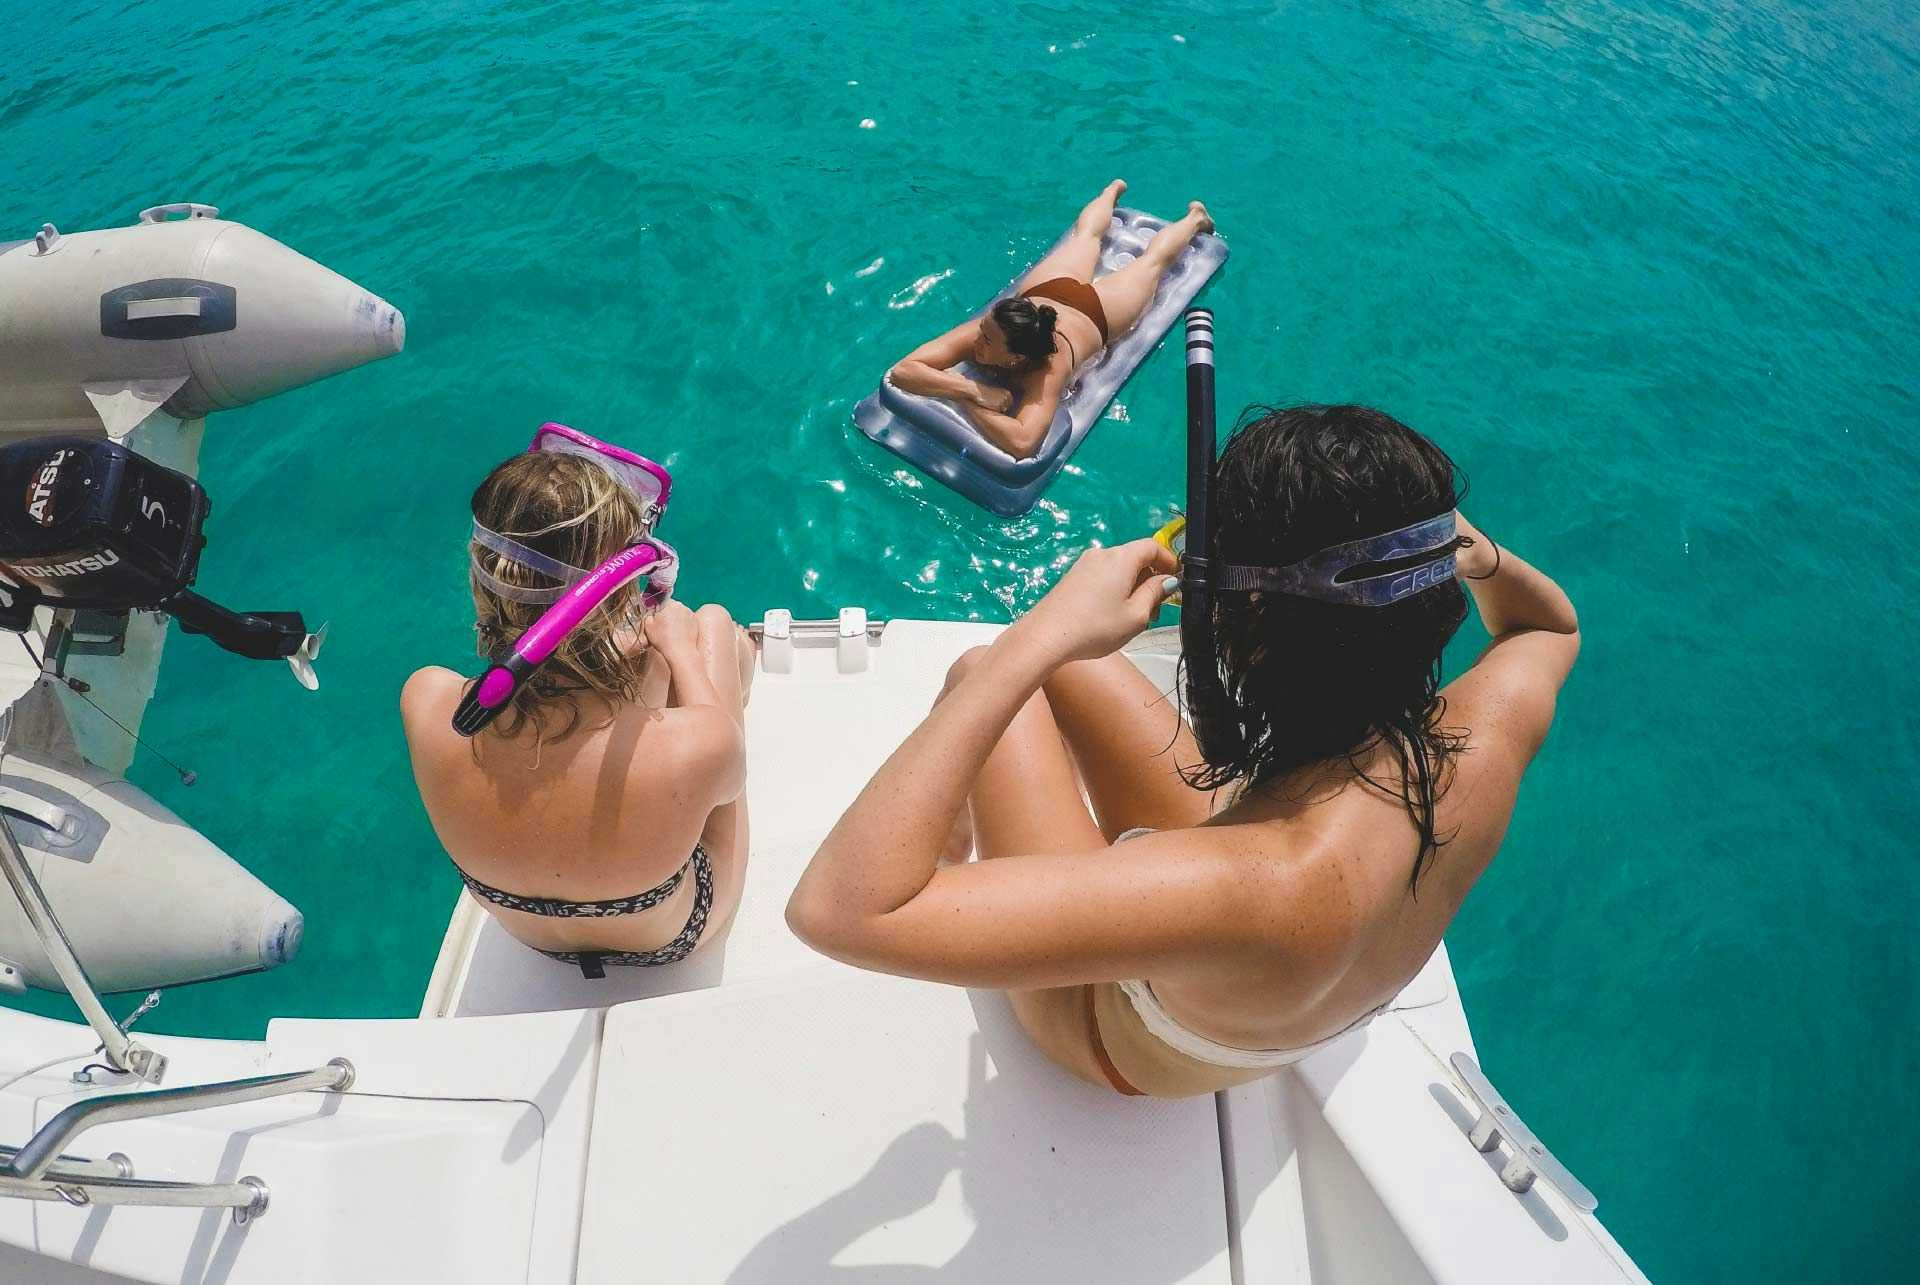 Two women on a yacht about to go snorkelling